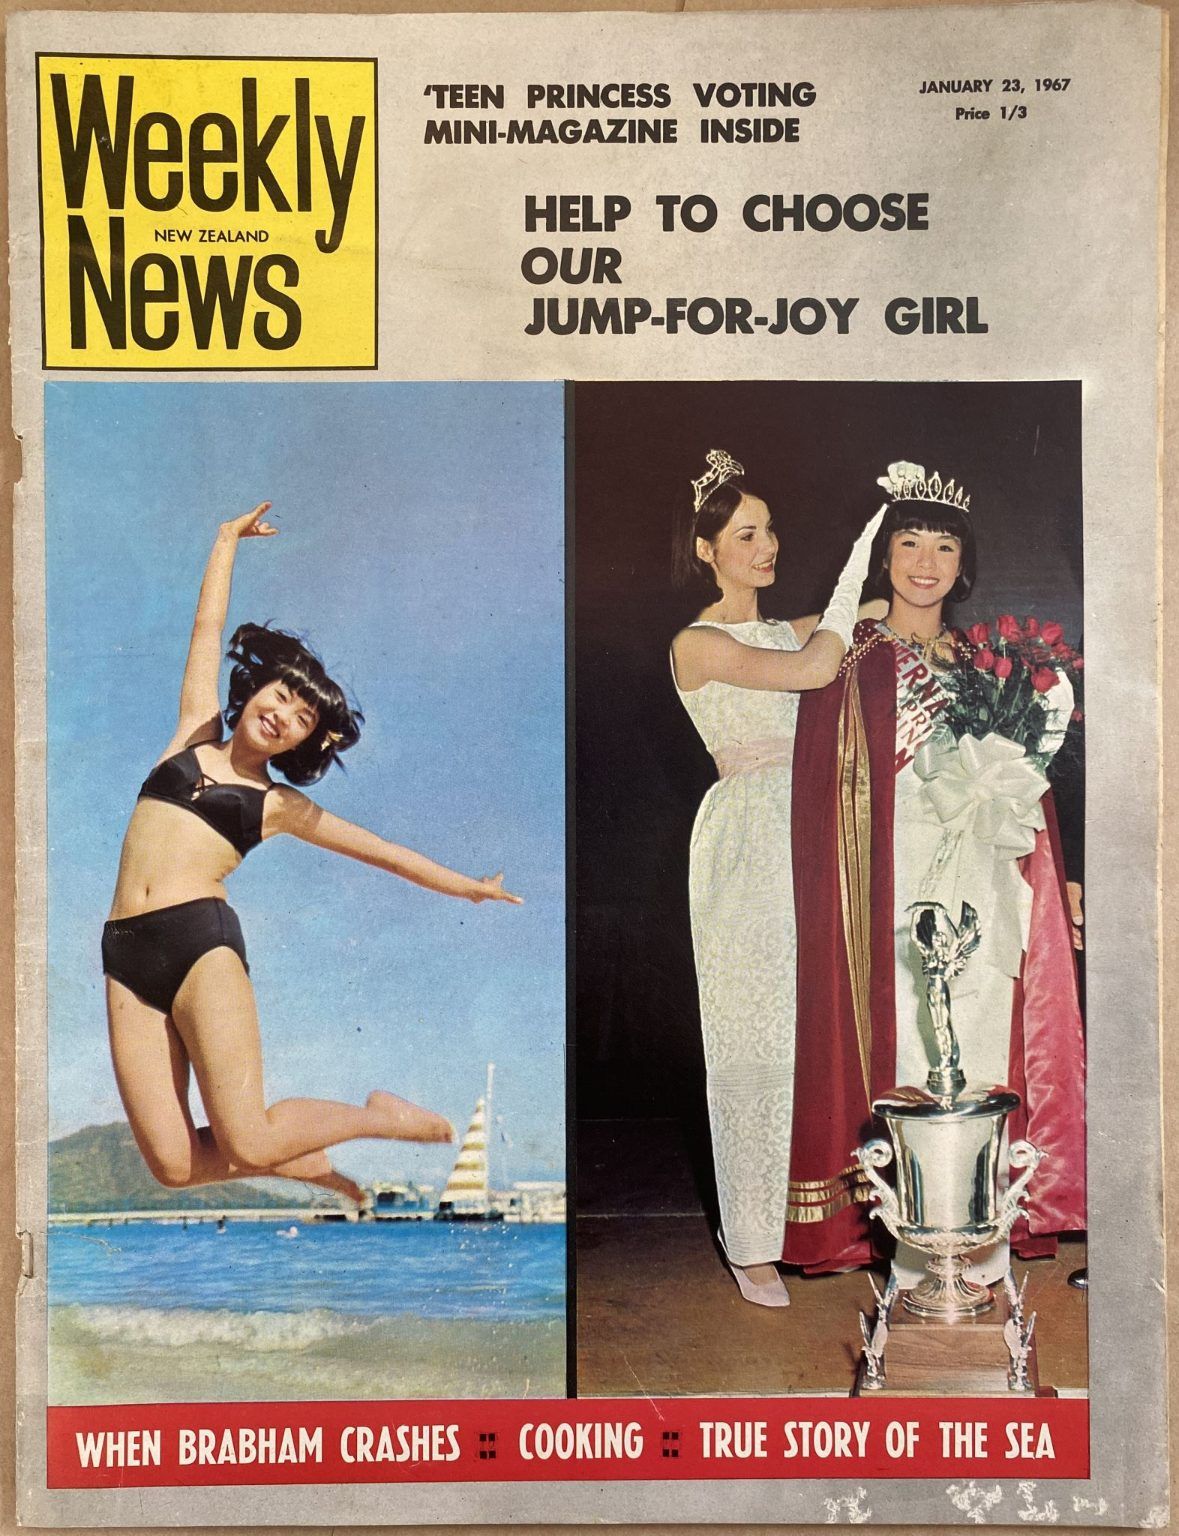 OLD NEWSPAPER: New Zealand Weekly News, No. 5382, 23 January 1967